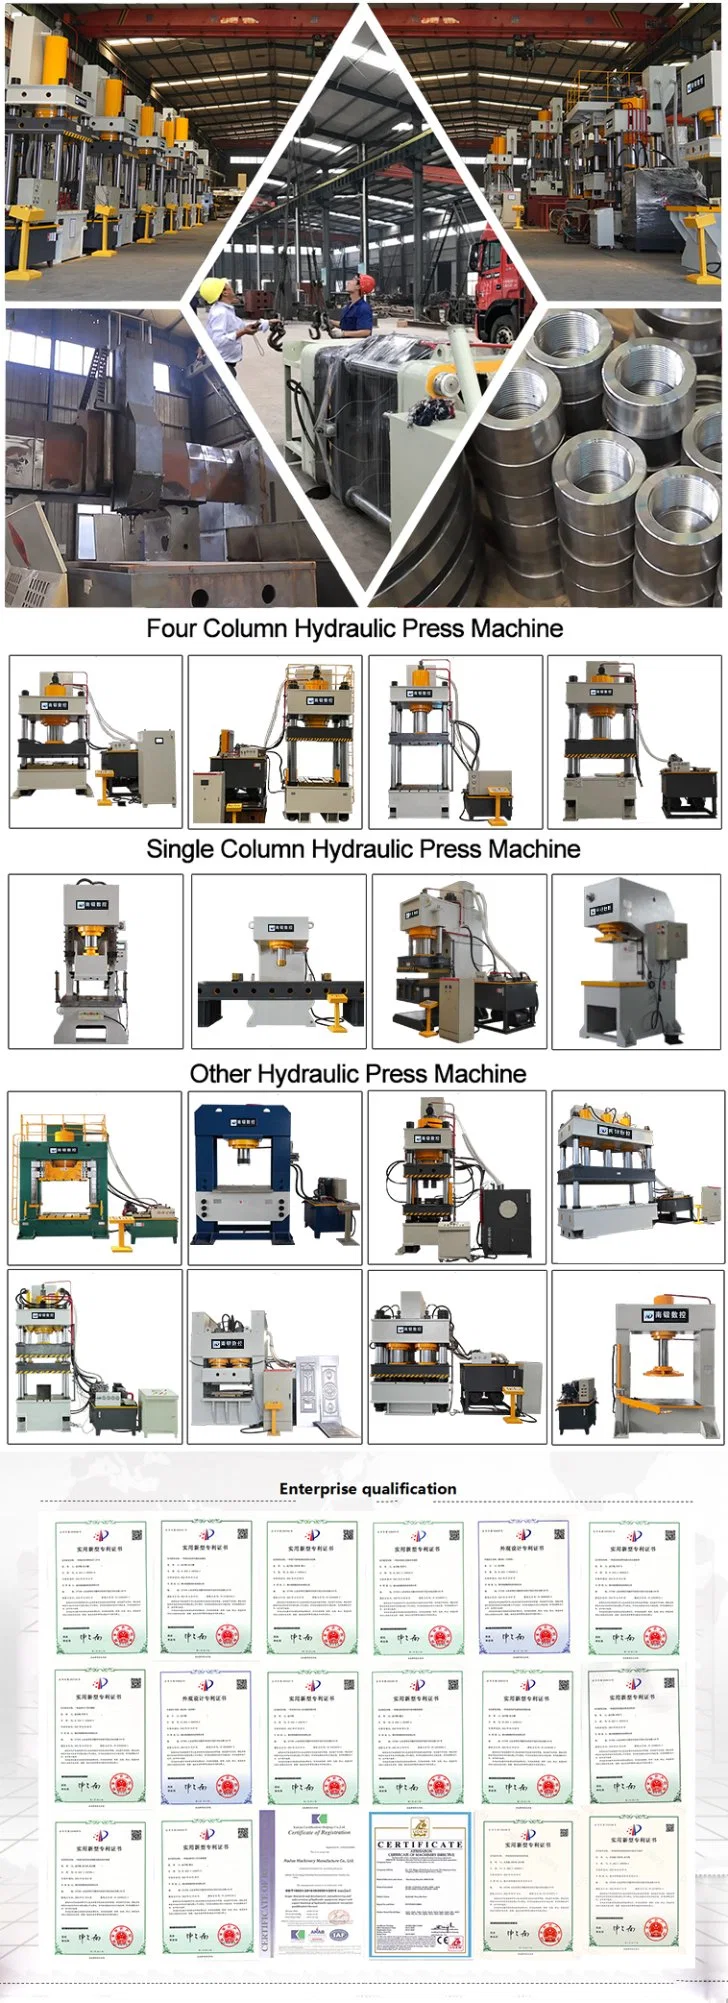 Affordable 100/200/315/500 Ton Four Column CNC Deep Drawing Hydraulic Press Machine for Wheelbarrow/End Cap/Head/Road Sign/Meal Tray/Water Tank/Satellite Dish